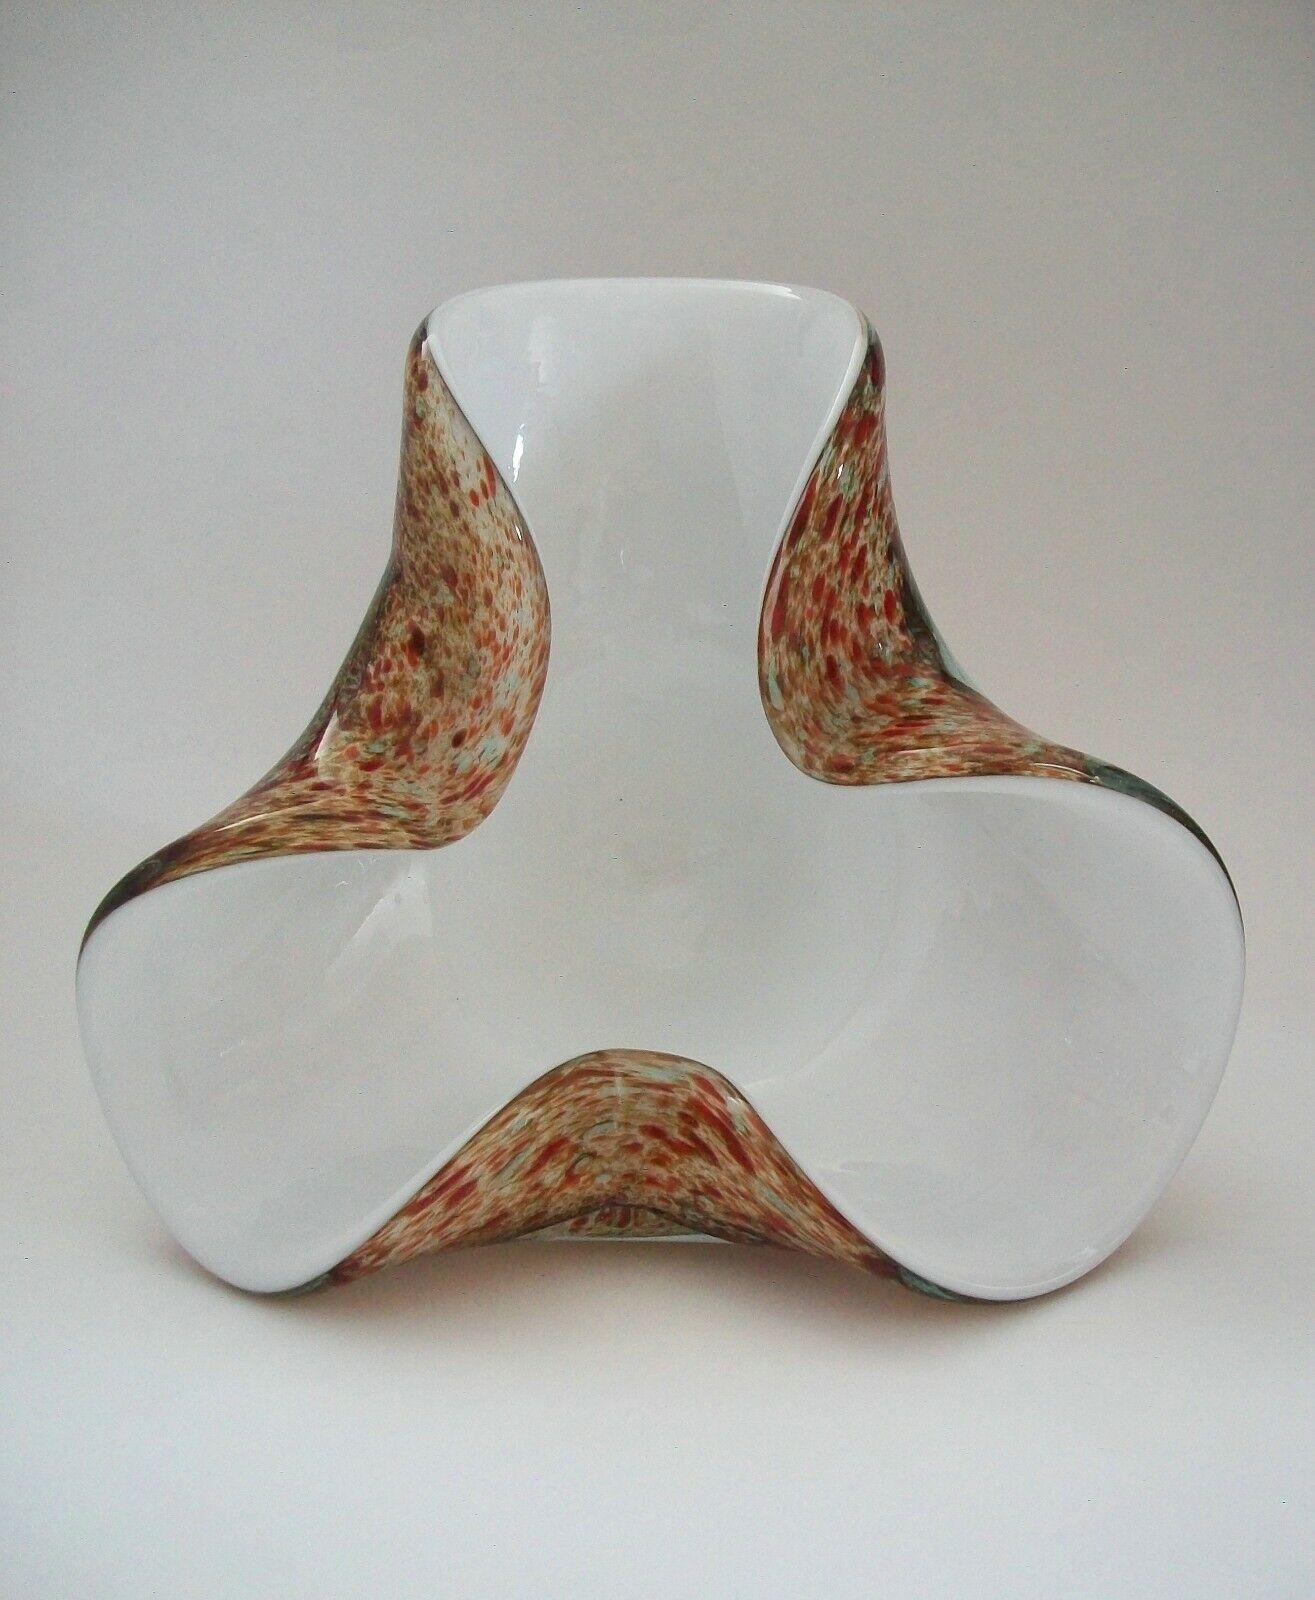 20th Century Midcentury Murano Trefoil Speckled Glass Bowl - Unsigned - Italy - circa 1970s For Sale